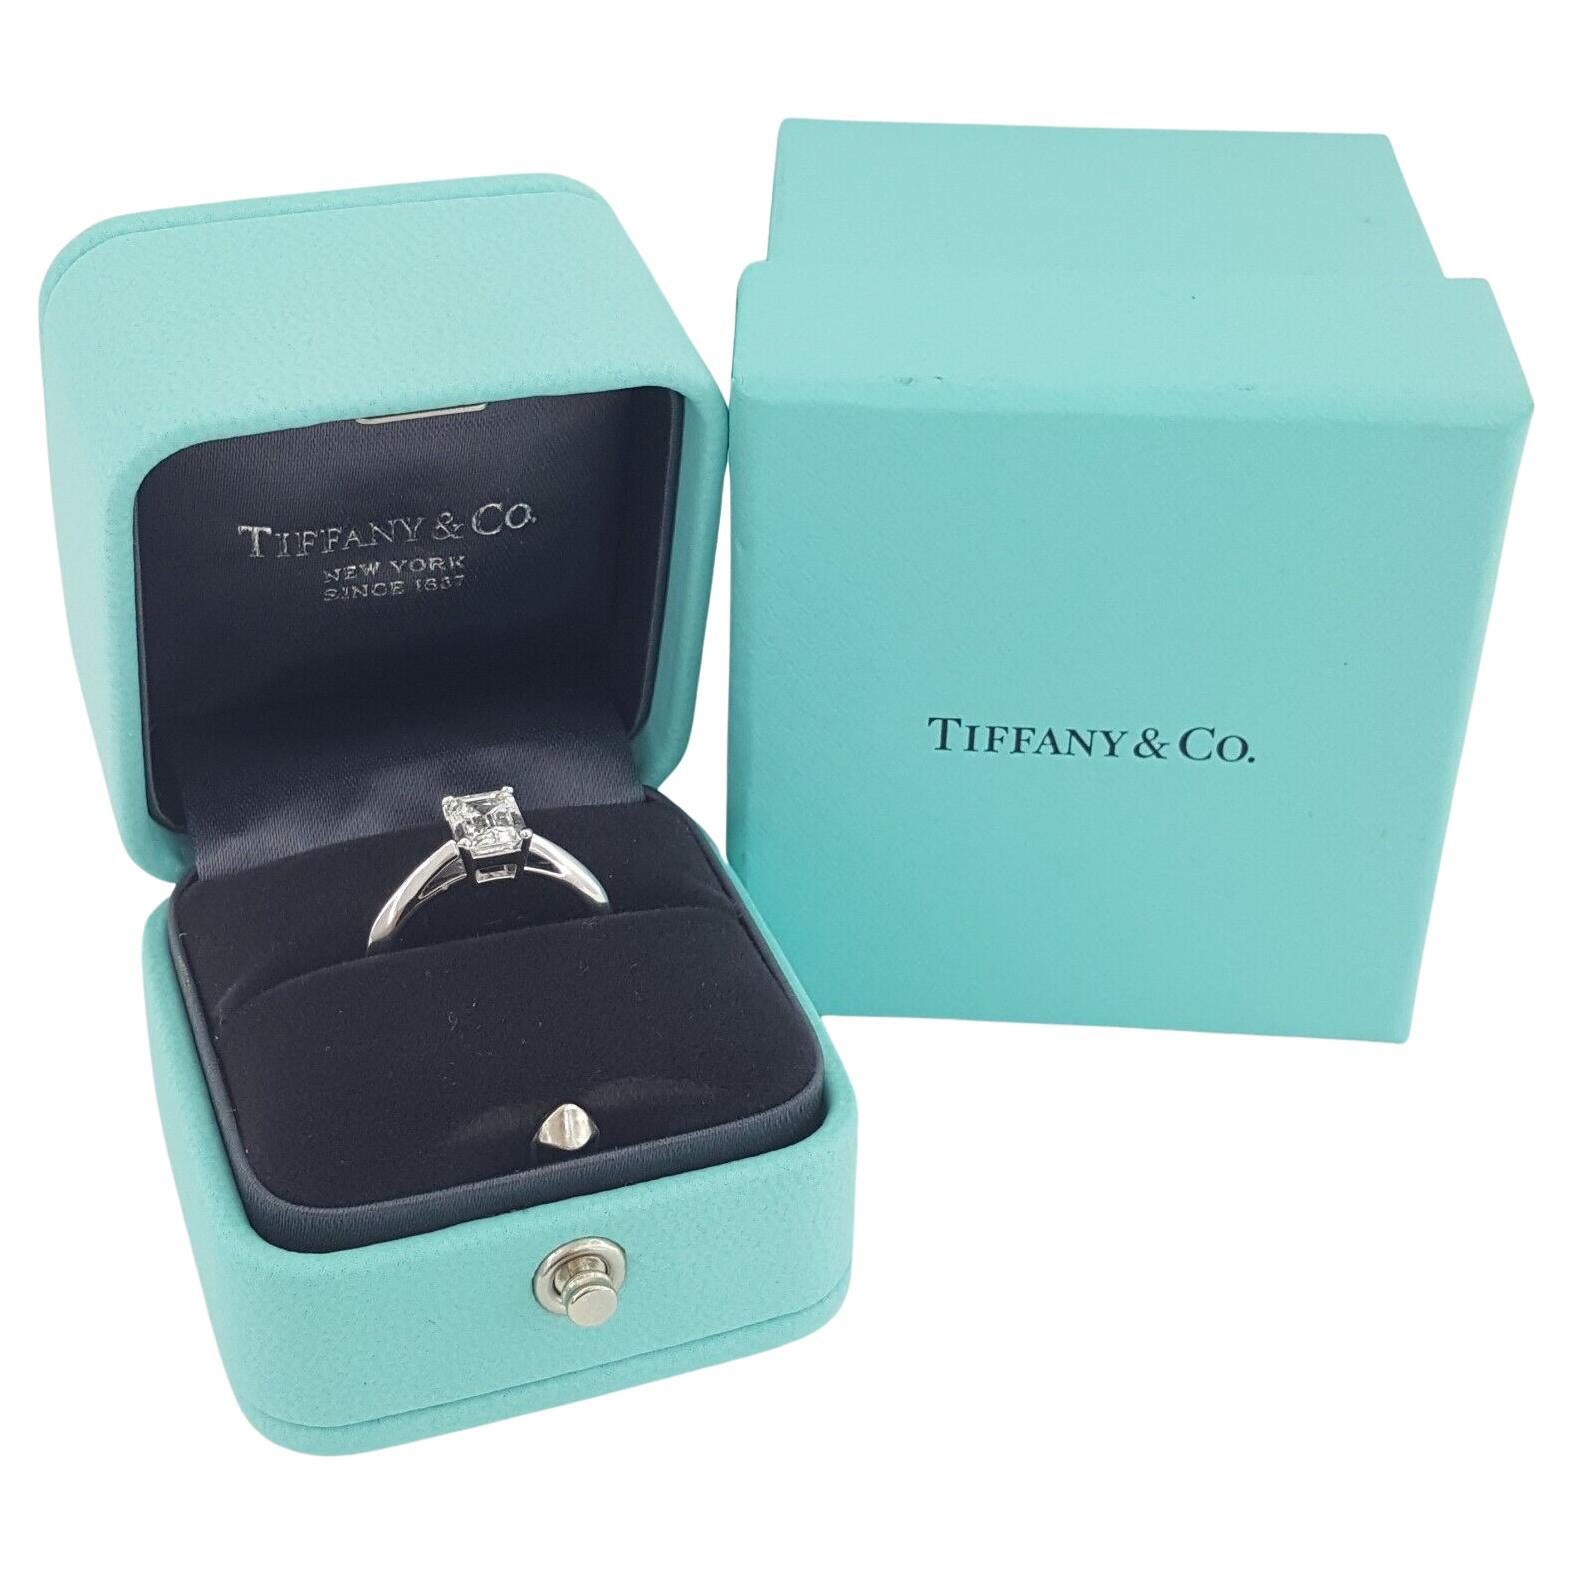 An exquisite Tiffany&Co. Emerald cut diamond solitaire ring set in solid platinum
with blue box and package and GIA certificate

